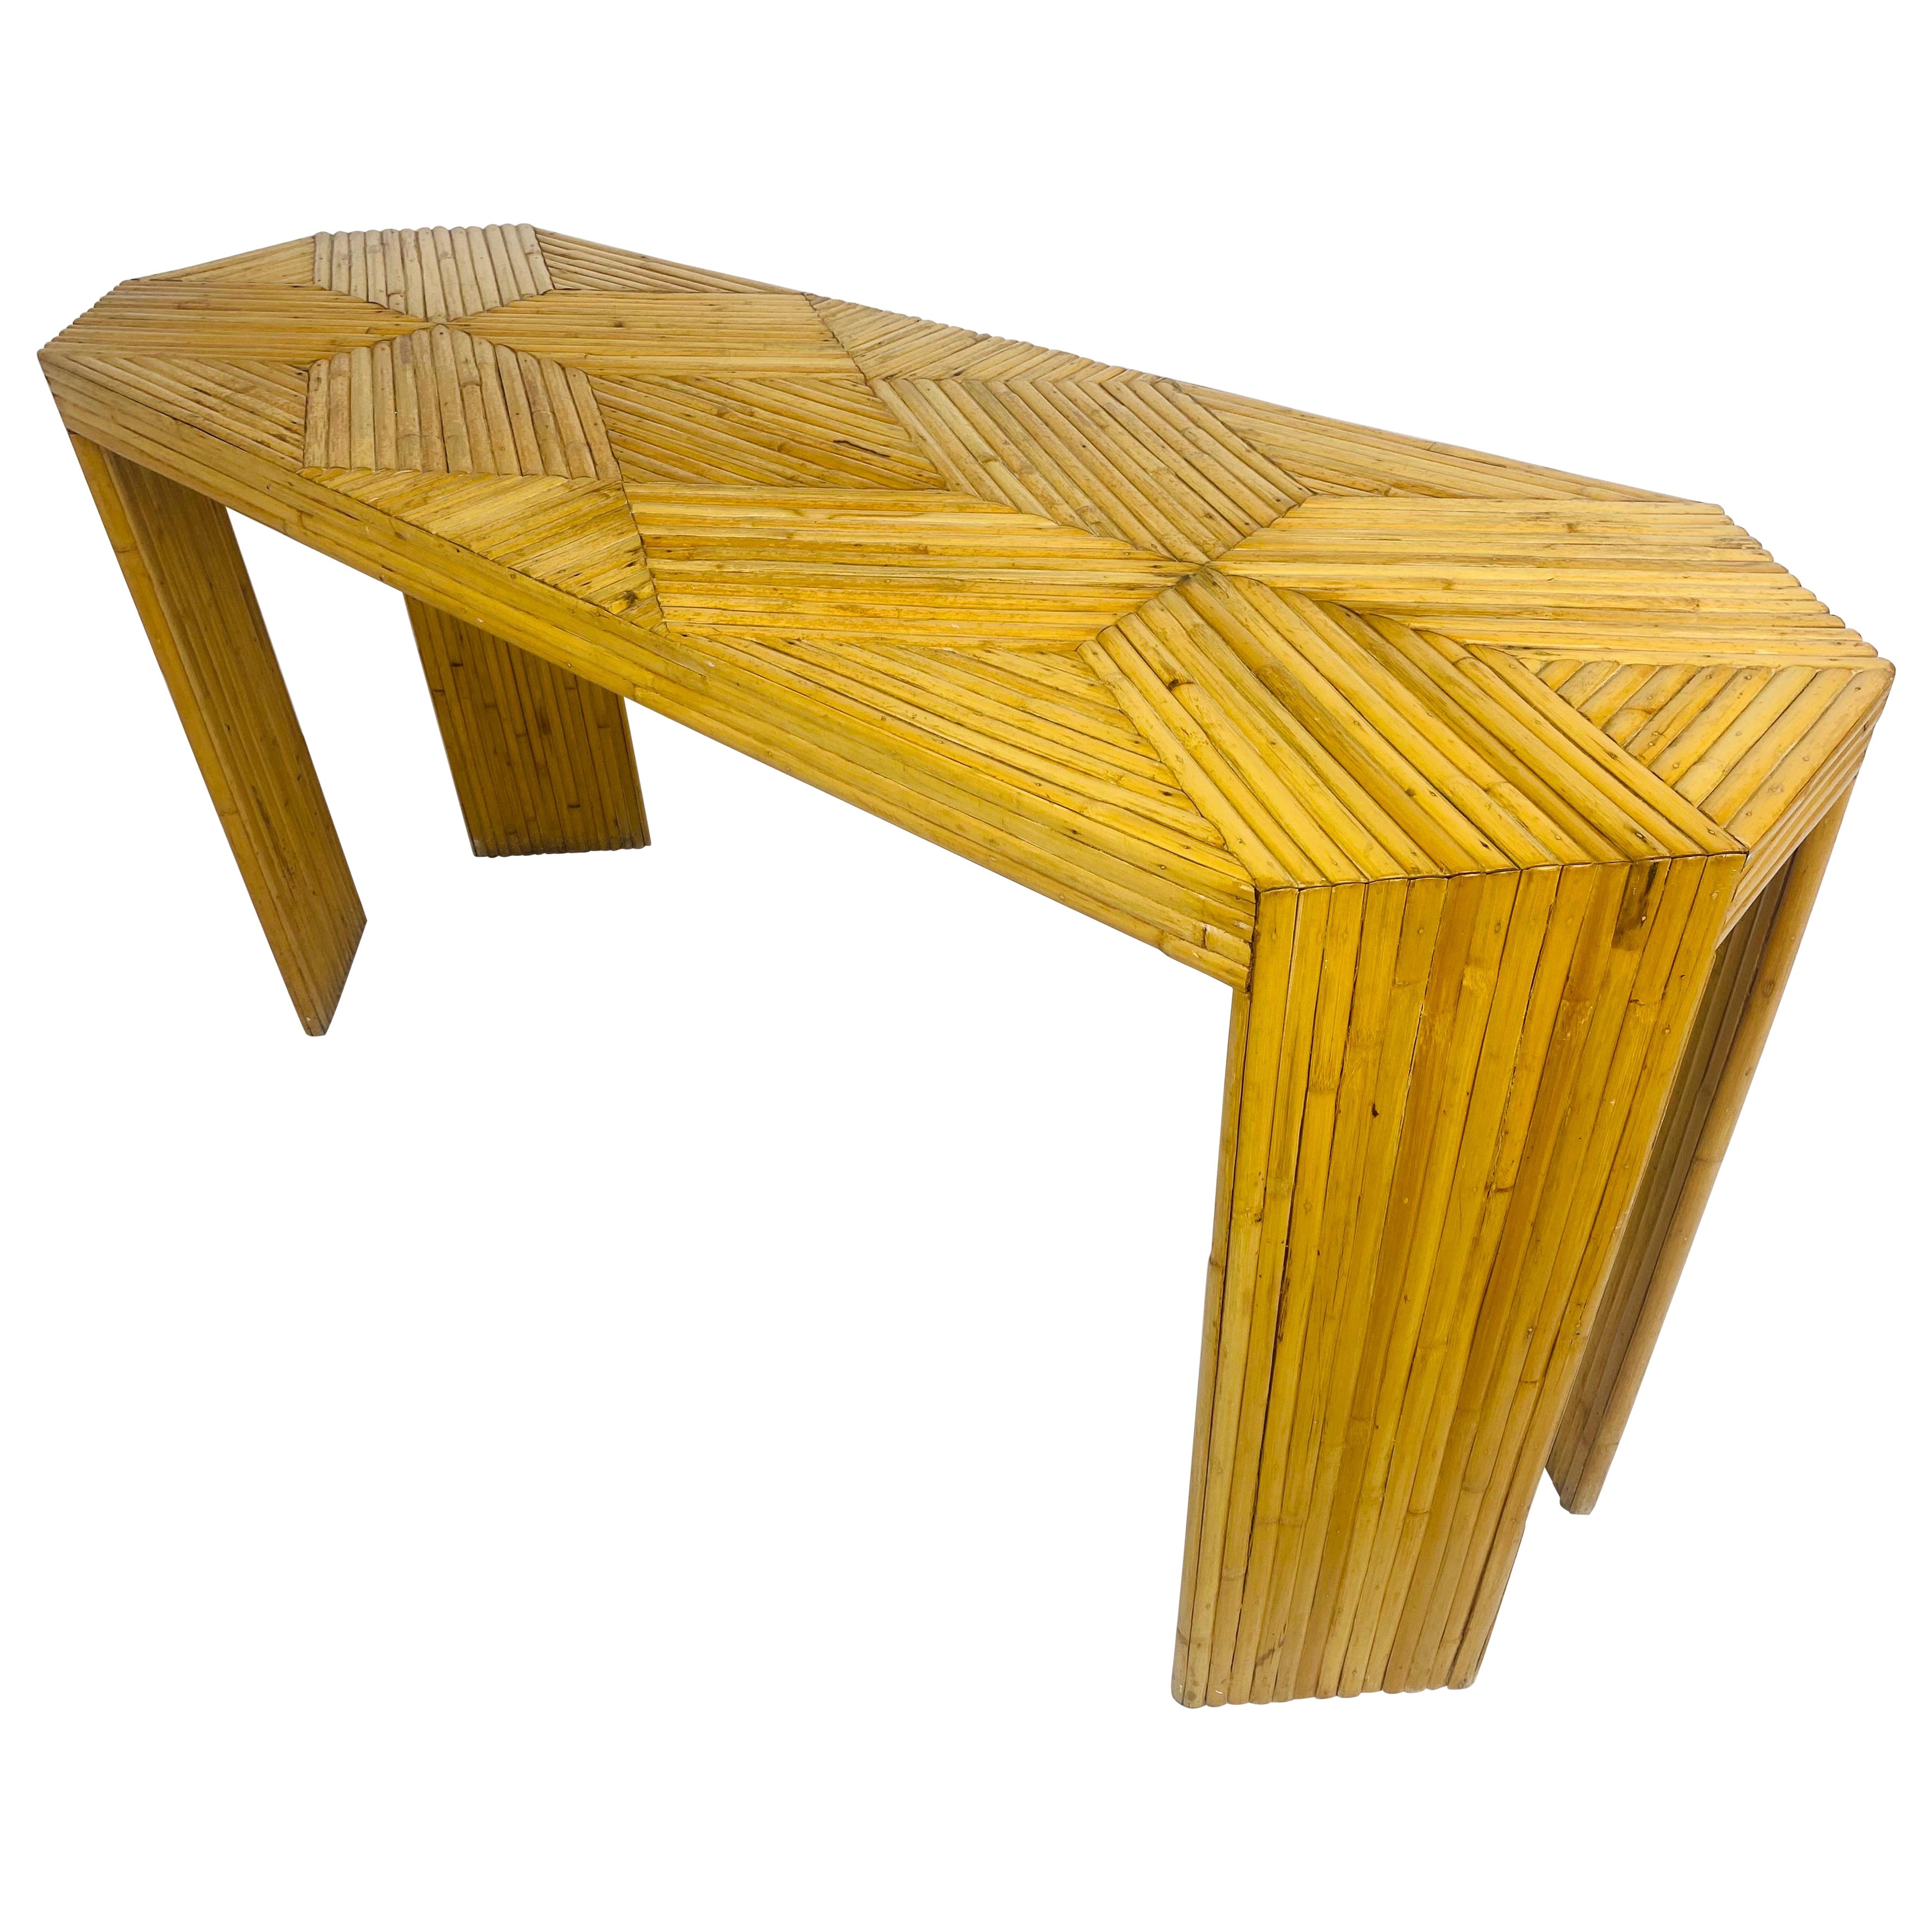 Art deco inspired coastal bamboo console in the matter of Maguire For Sale